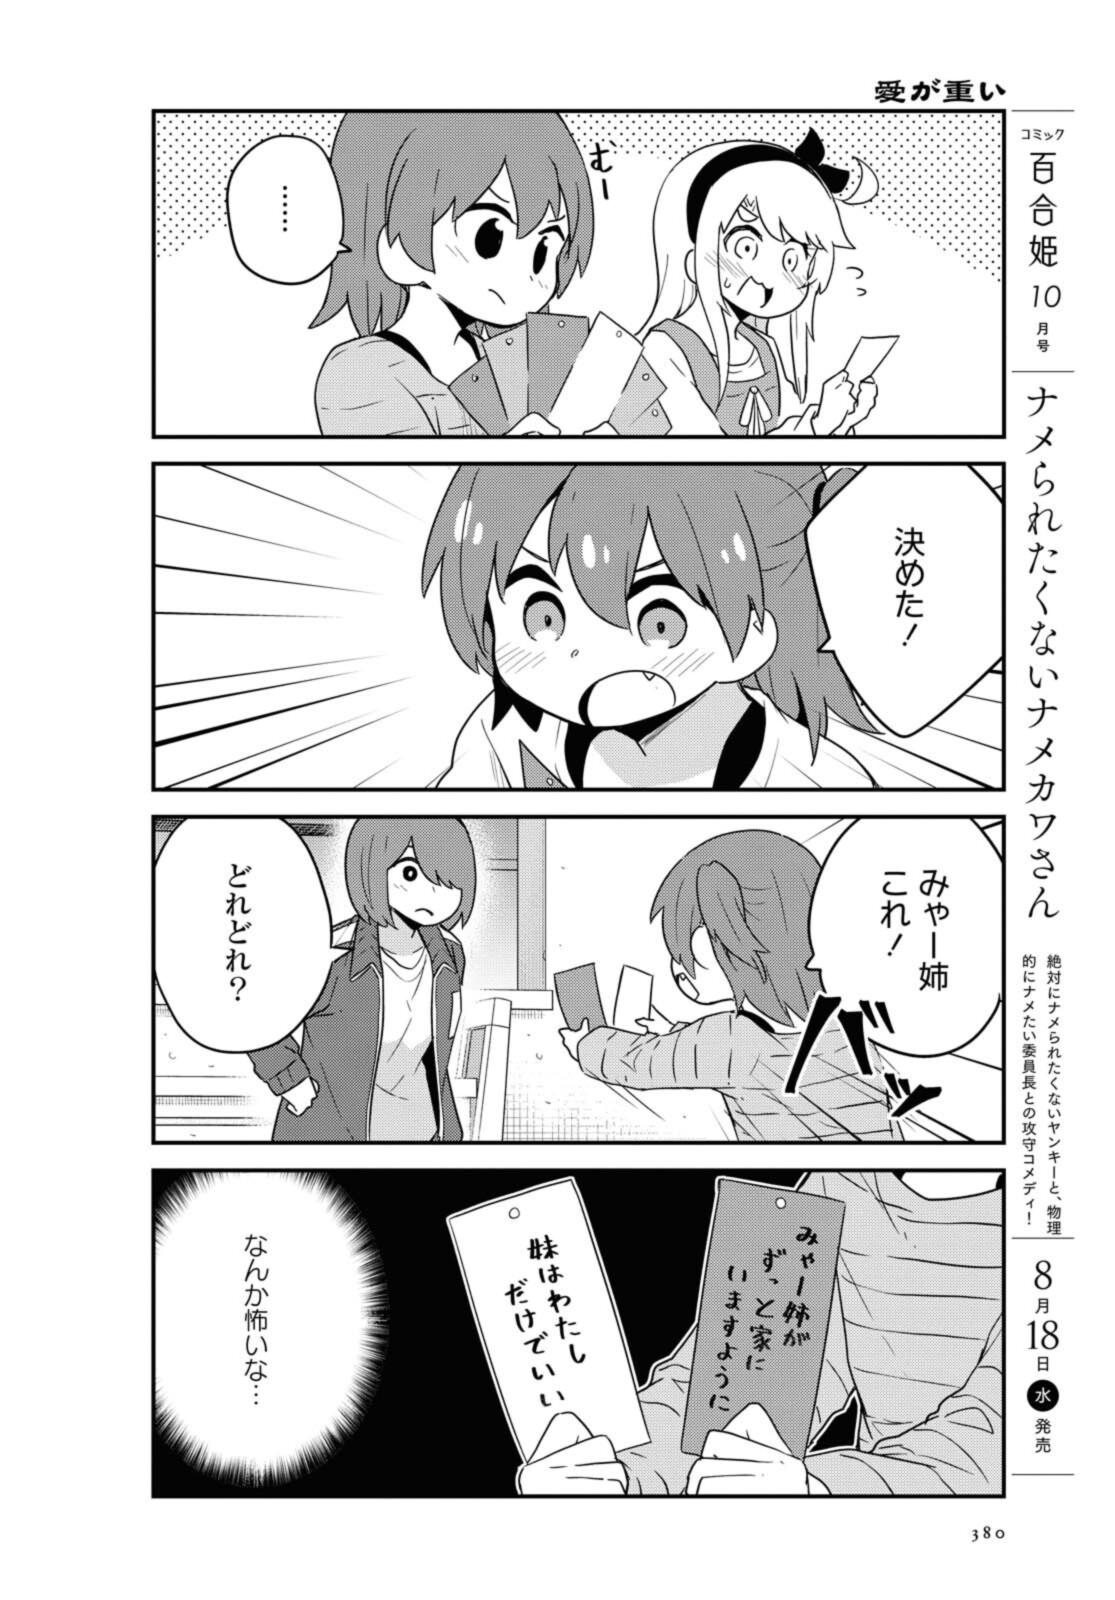 Wataten! An Angel Flew Down to Me 私に天使が舞い降りた！ 第85話 - Page 10